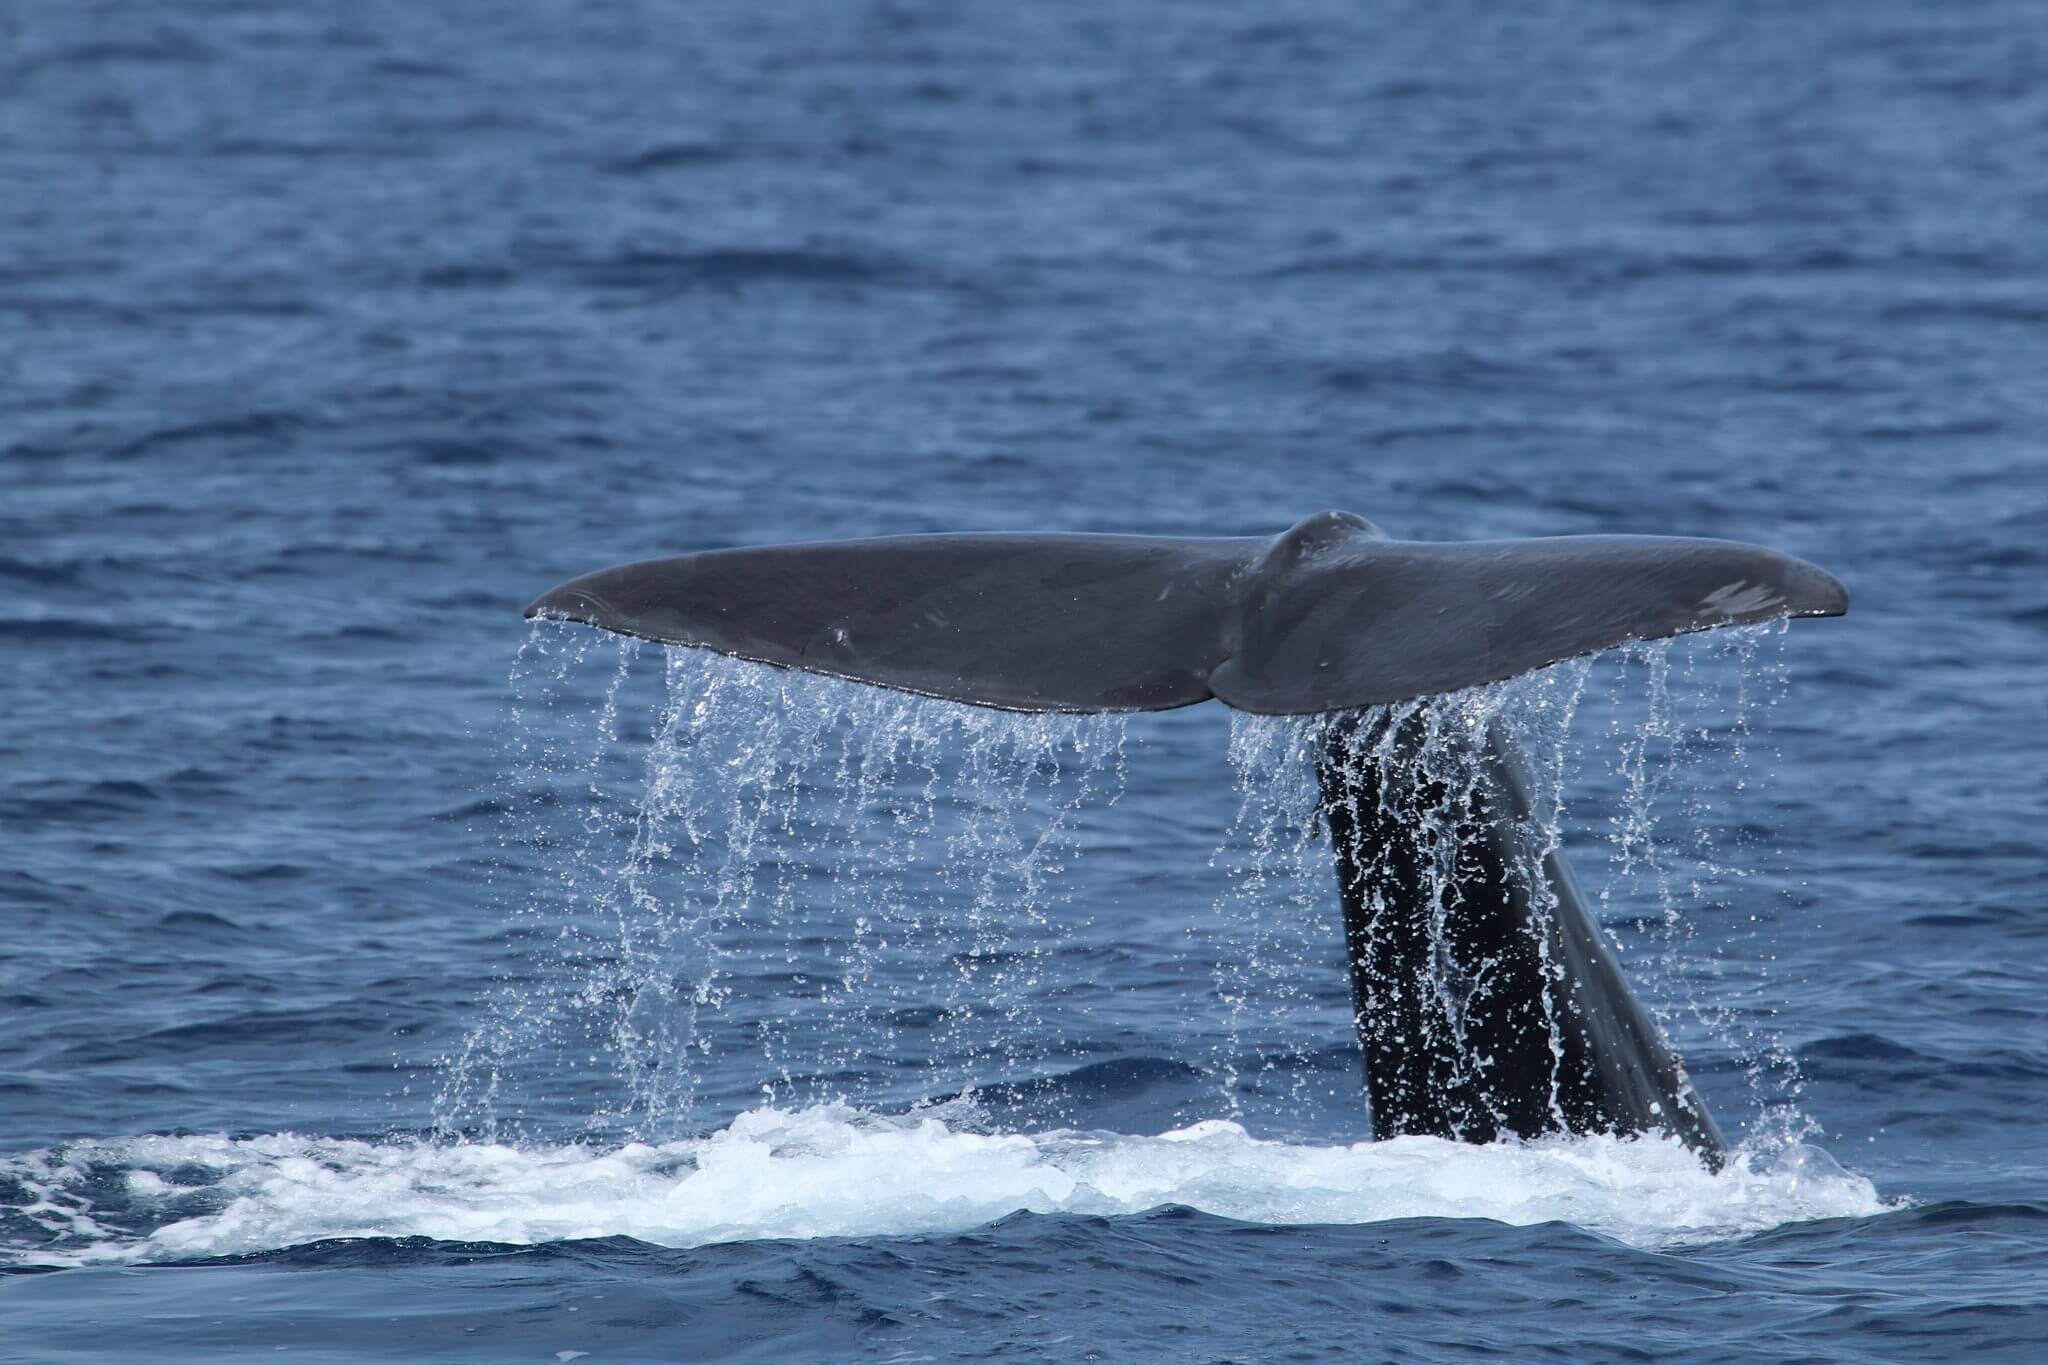 The fluke of a diving sperm whale